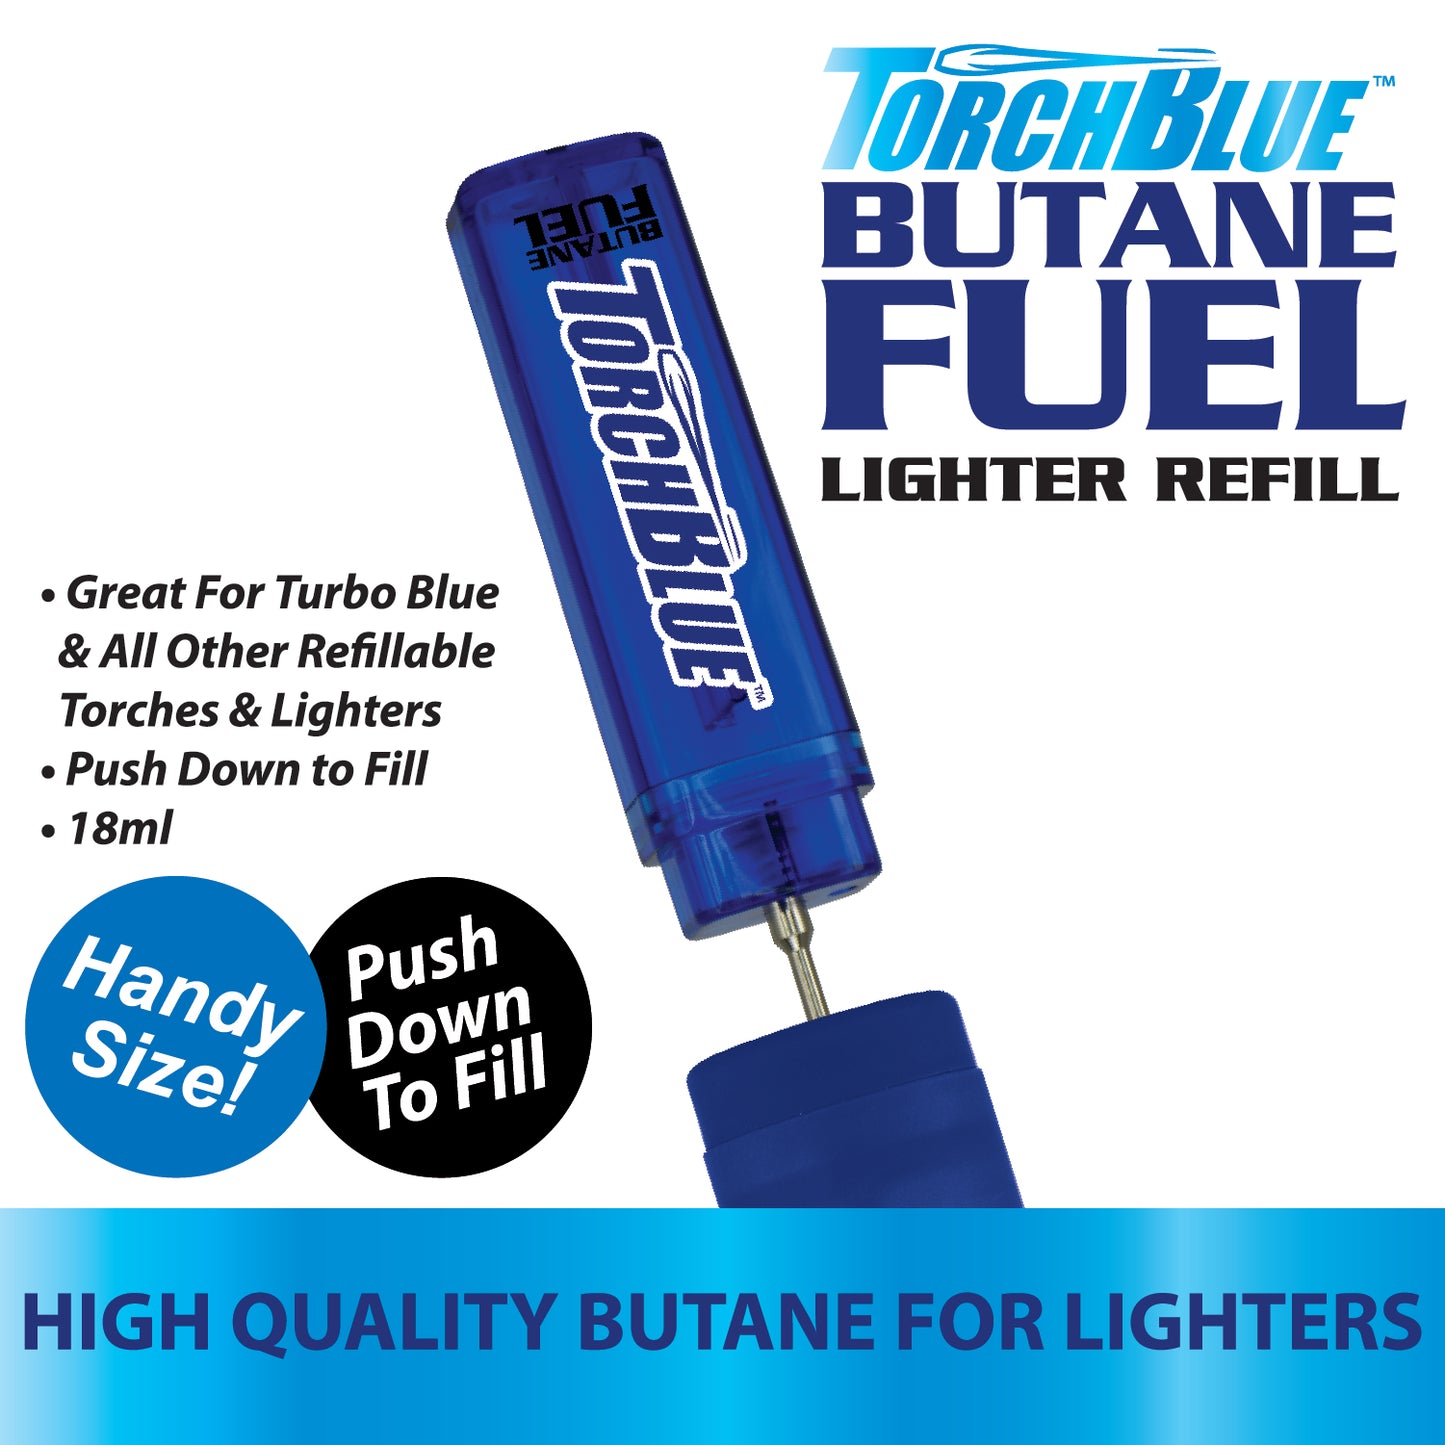 ITEM NUMBER 024701 TORCH BLUE 18ML BUTANE REFILL FUEL 12 PIECES PER DISPLAY